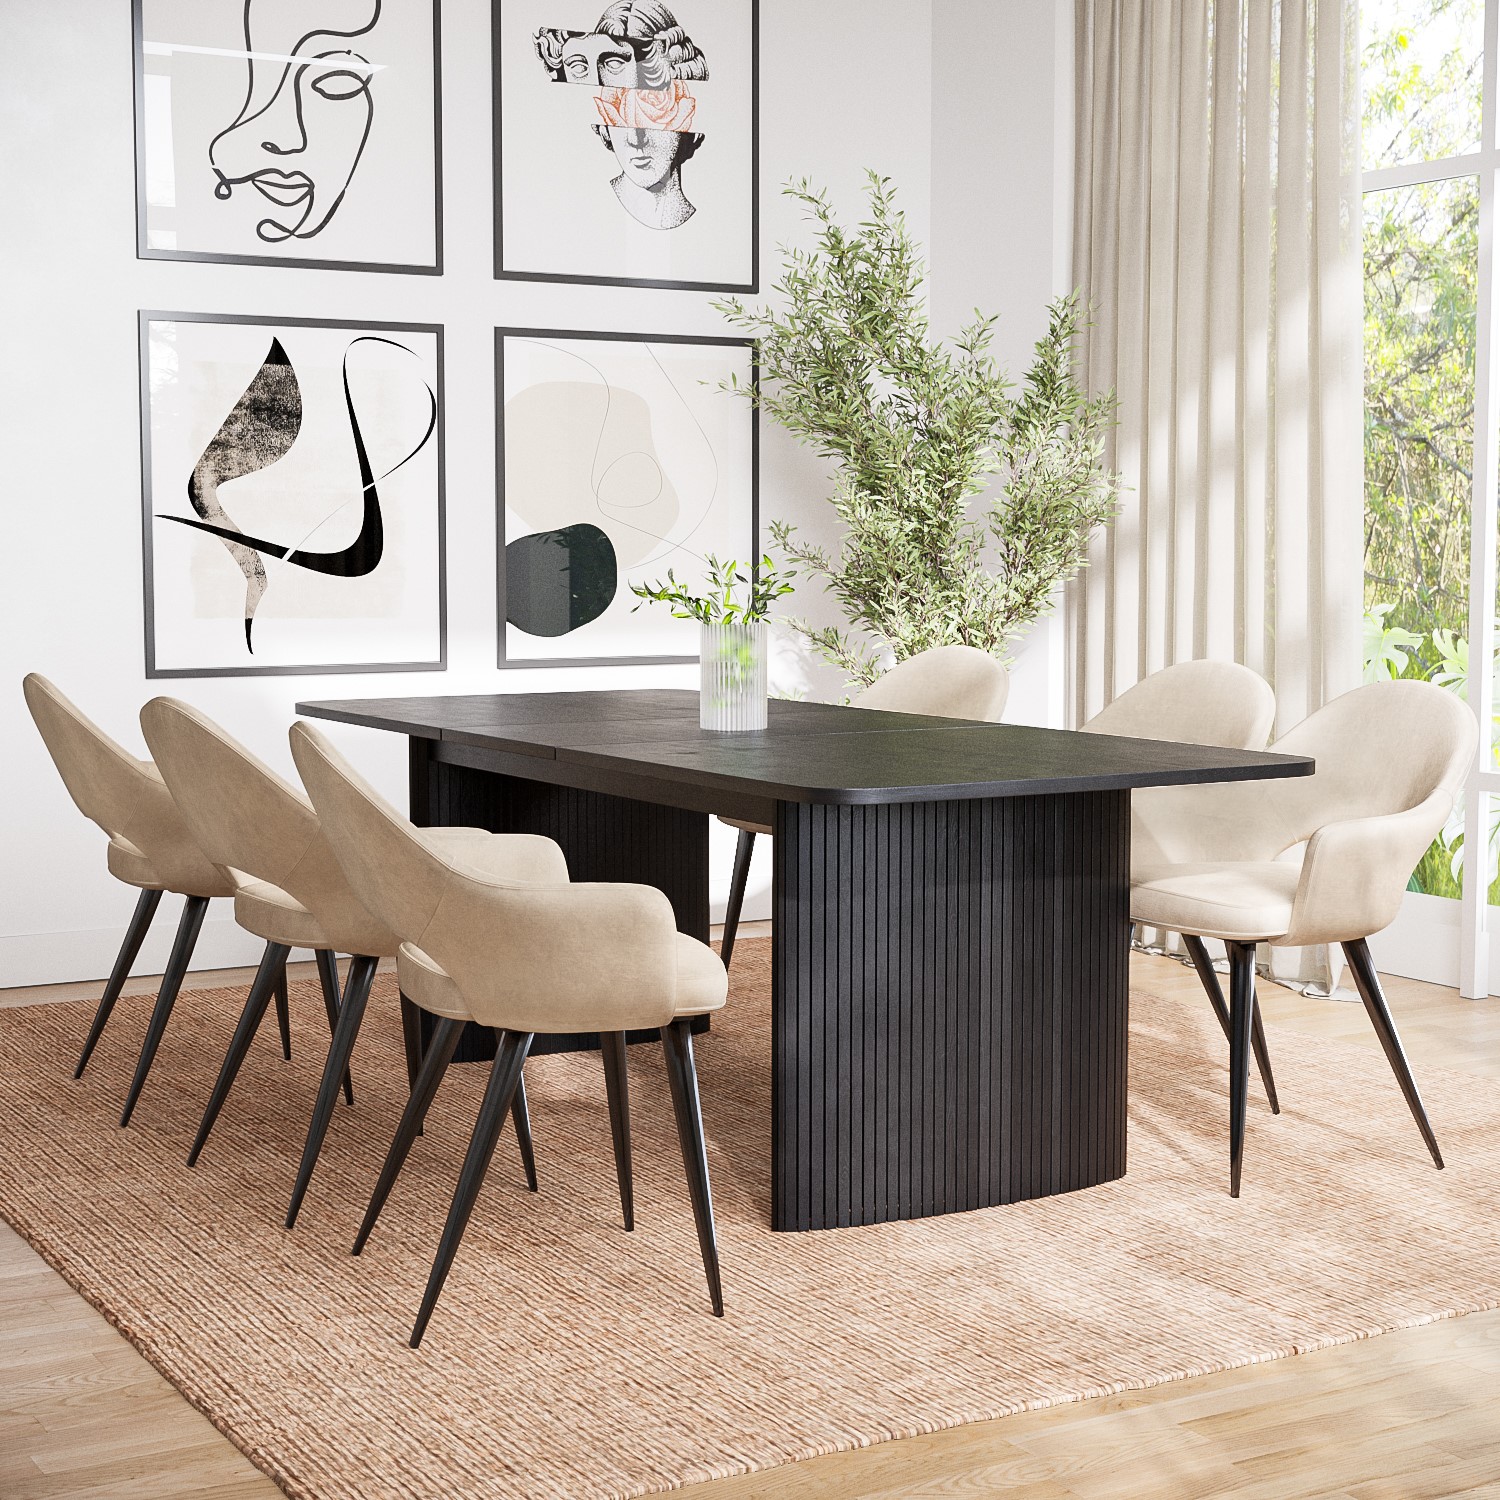 Photo of Large black oak dining table with 6 beige fabric dining chairs - jarel